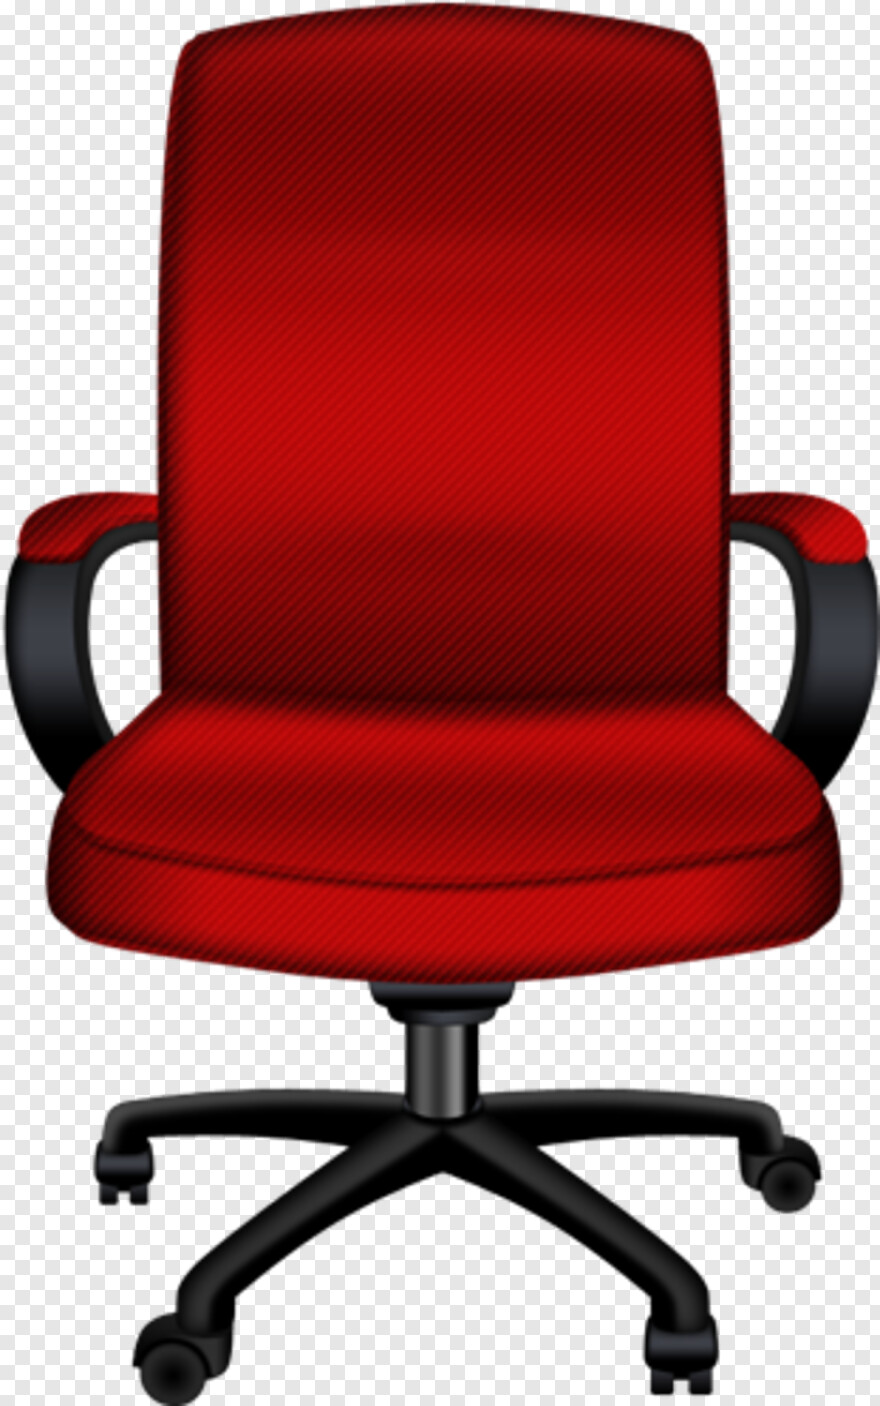 office-chair # 452034